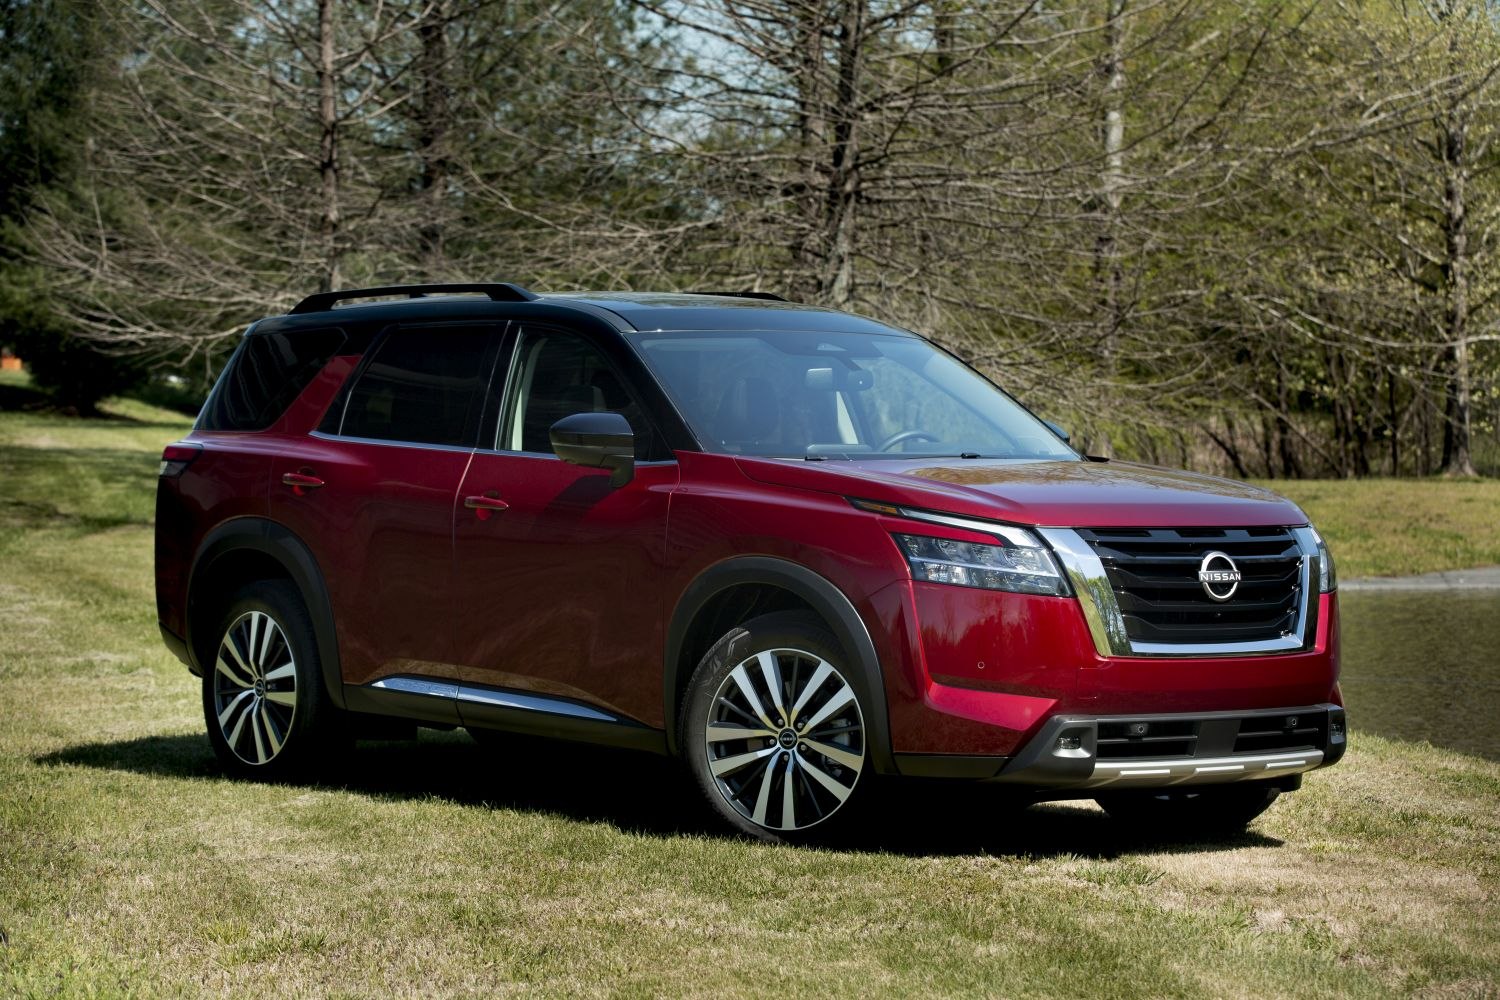 Nissan Pathfinder technical specifications and fuel economy